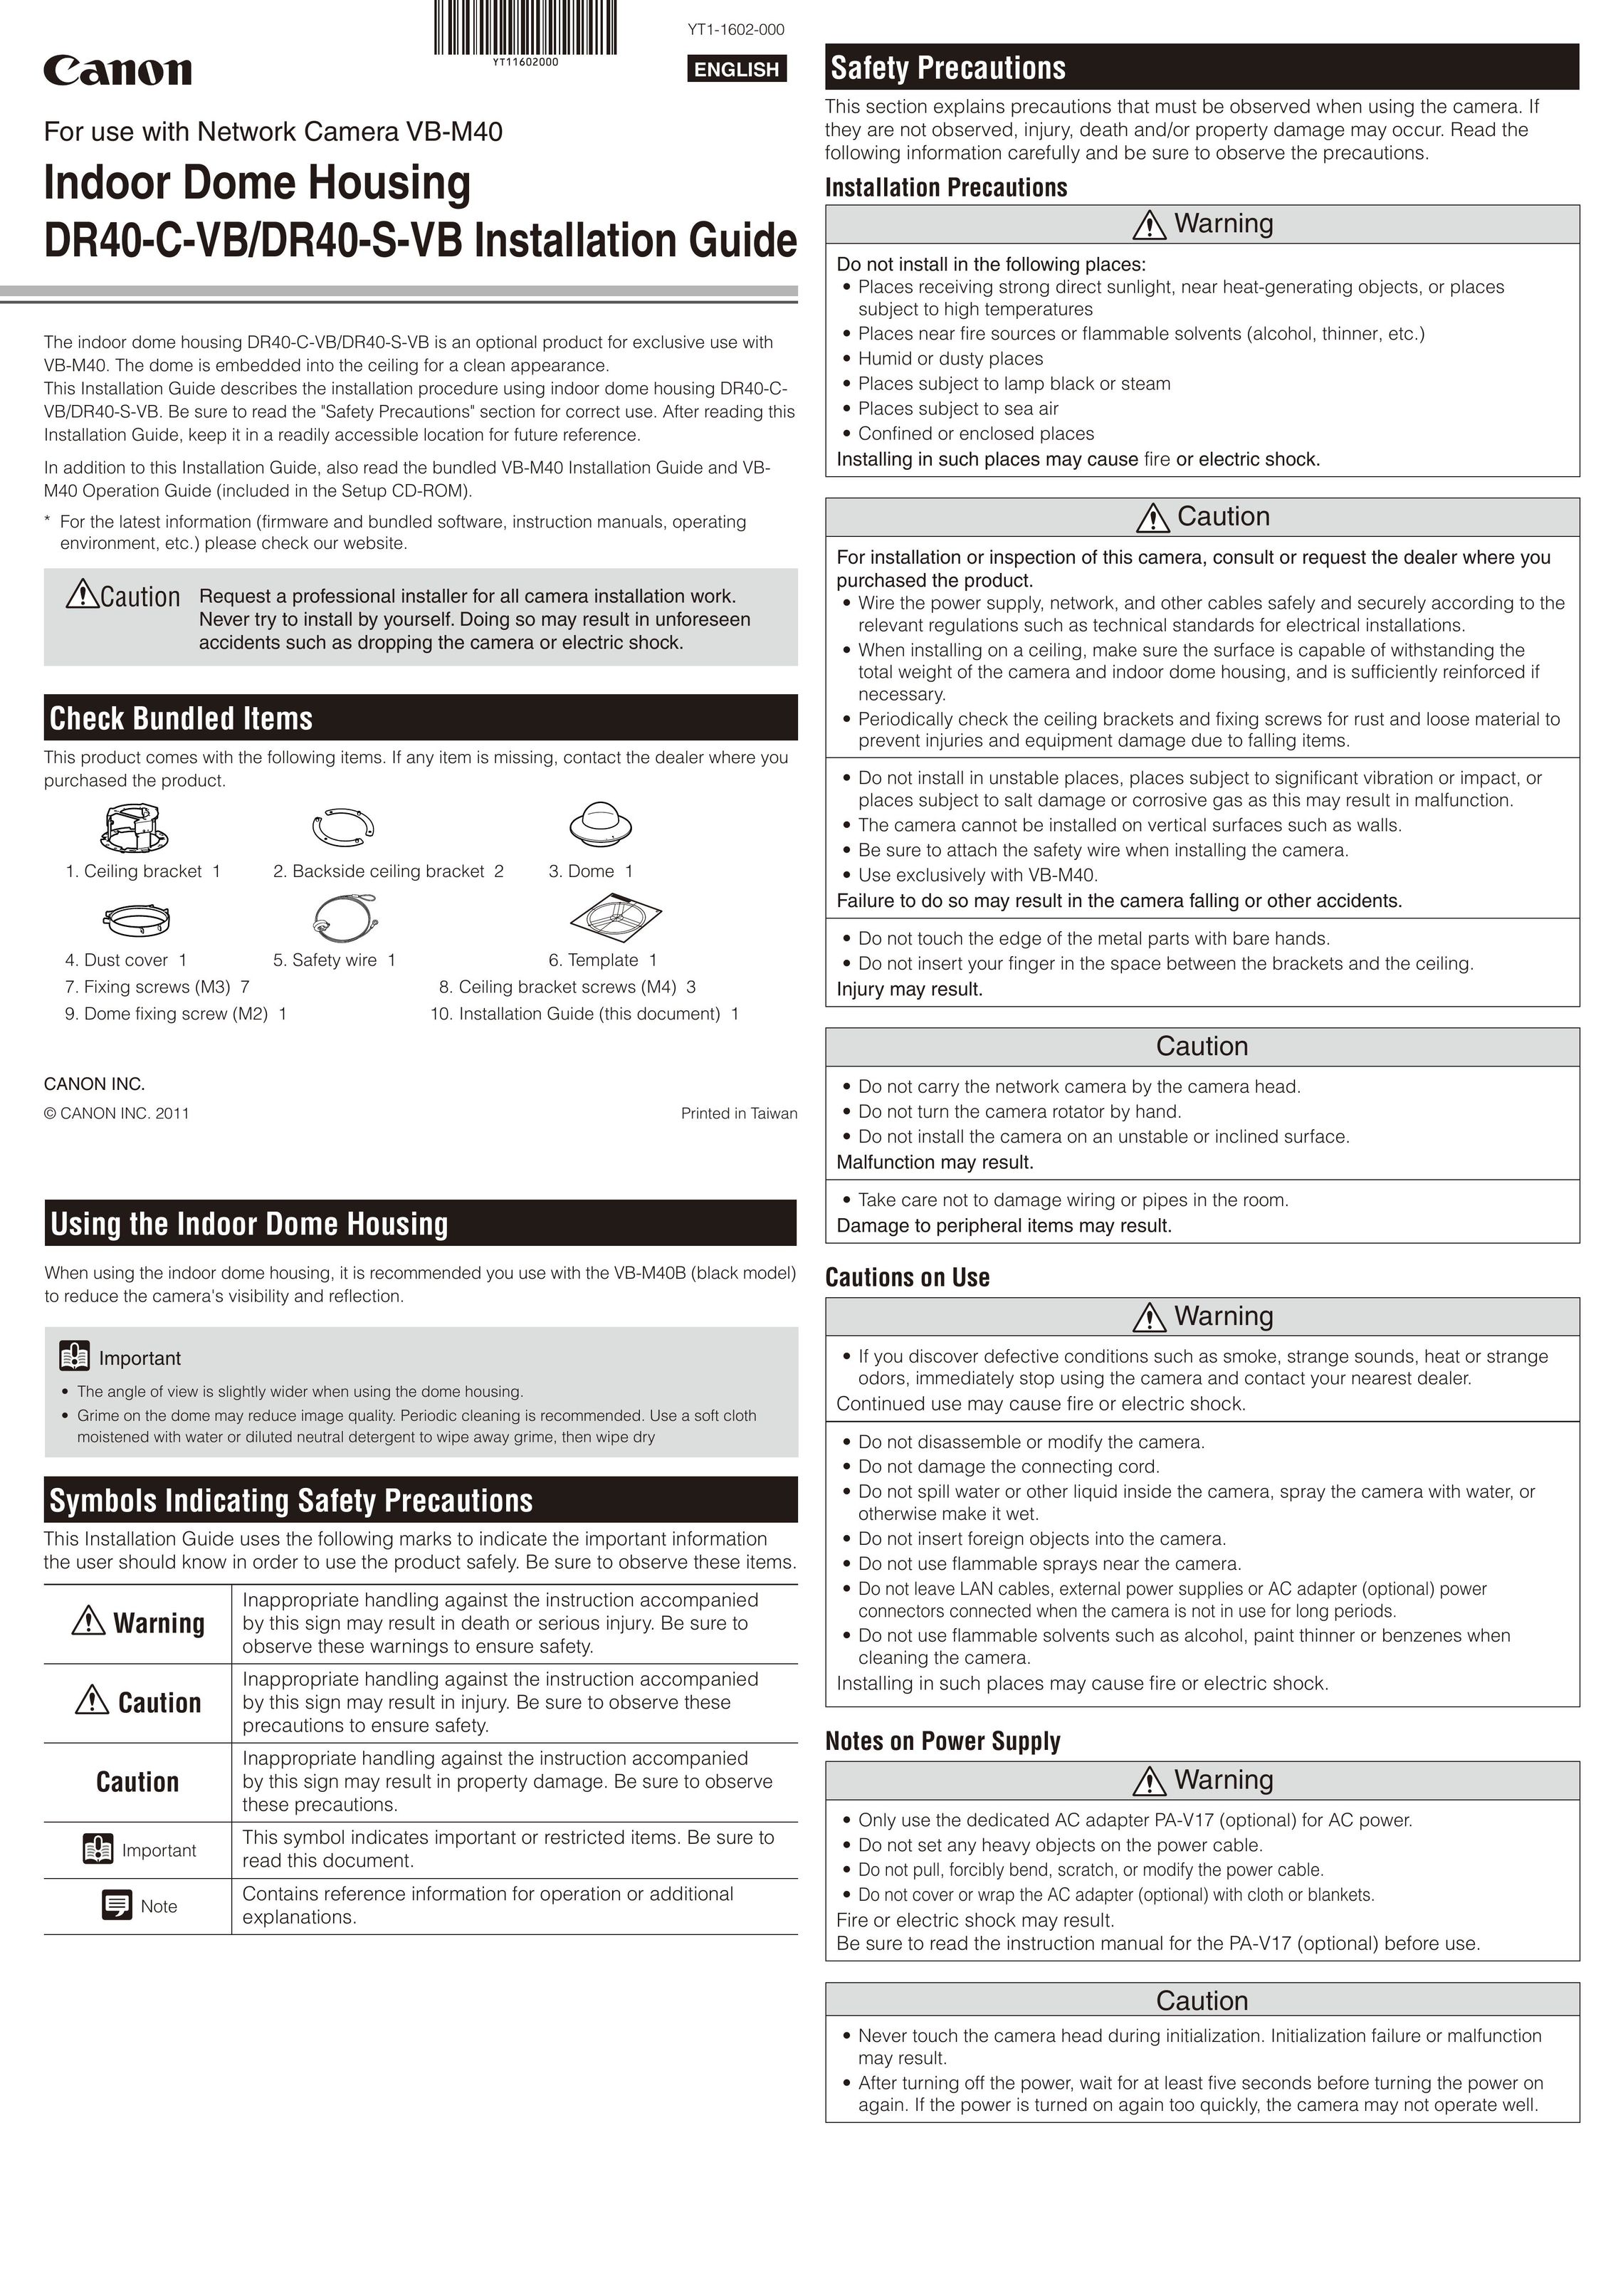 Canon DR40-C-VB Indoor Furnishings User Manual